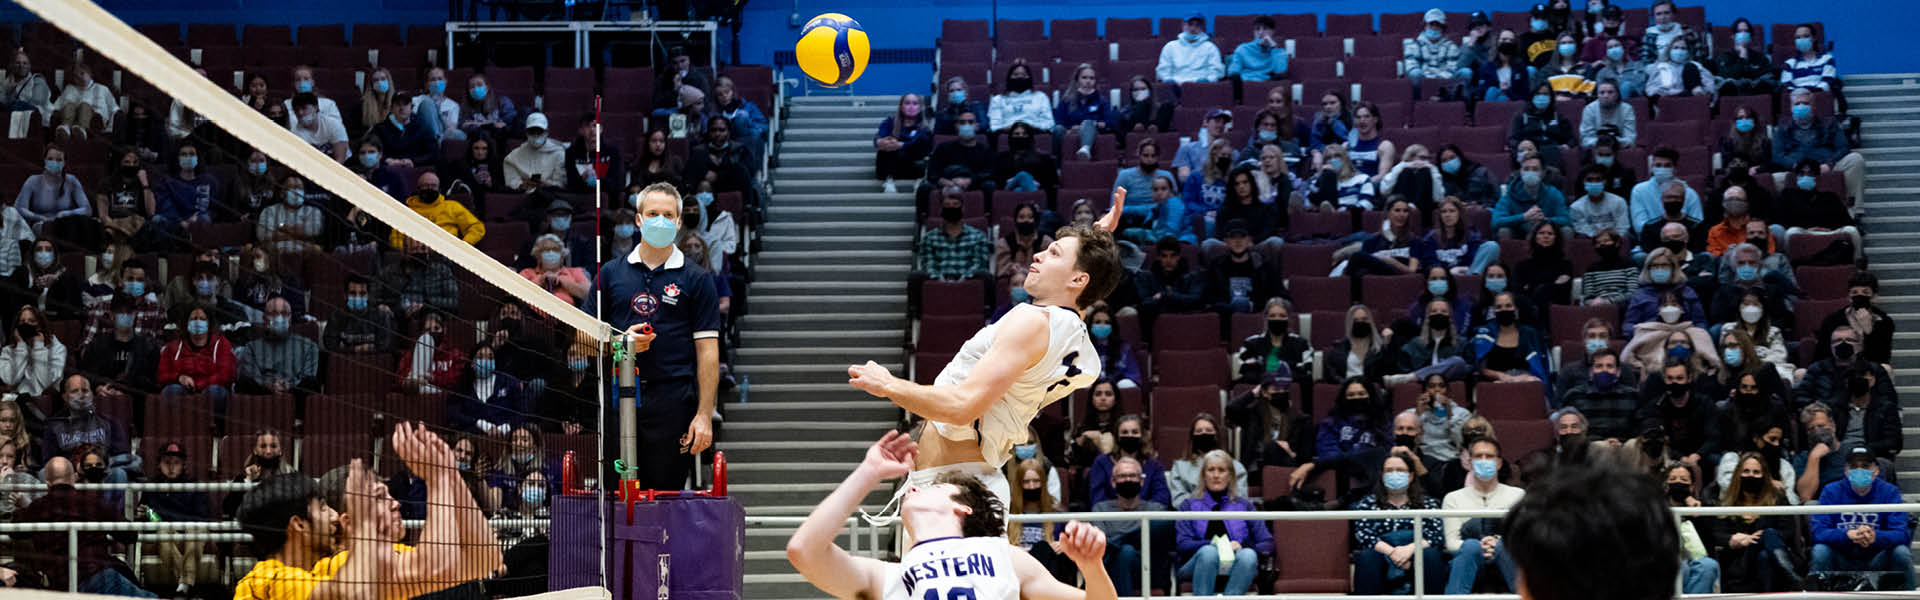 Western Mustangs men’s volleyball player jumping to spike the ball